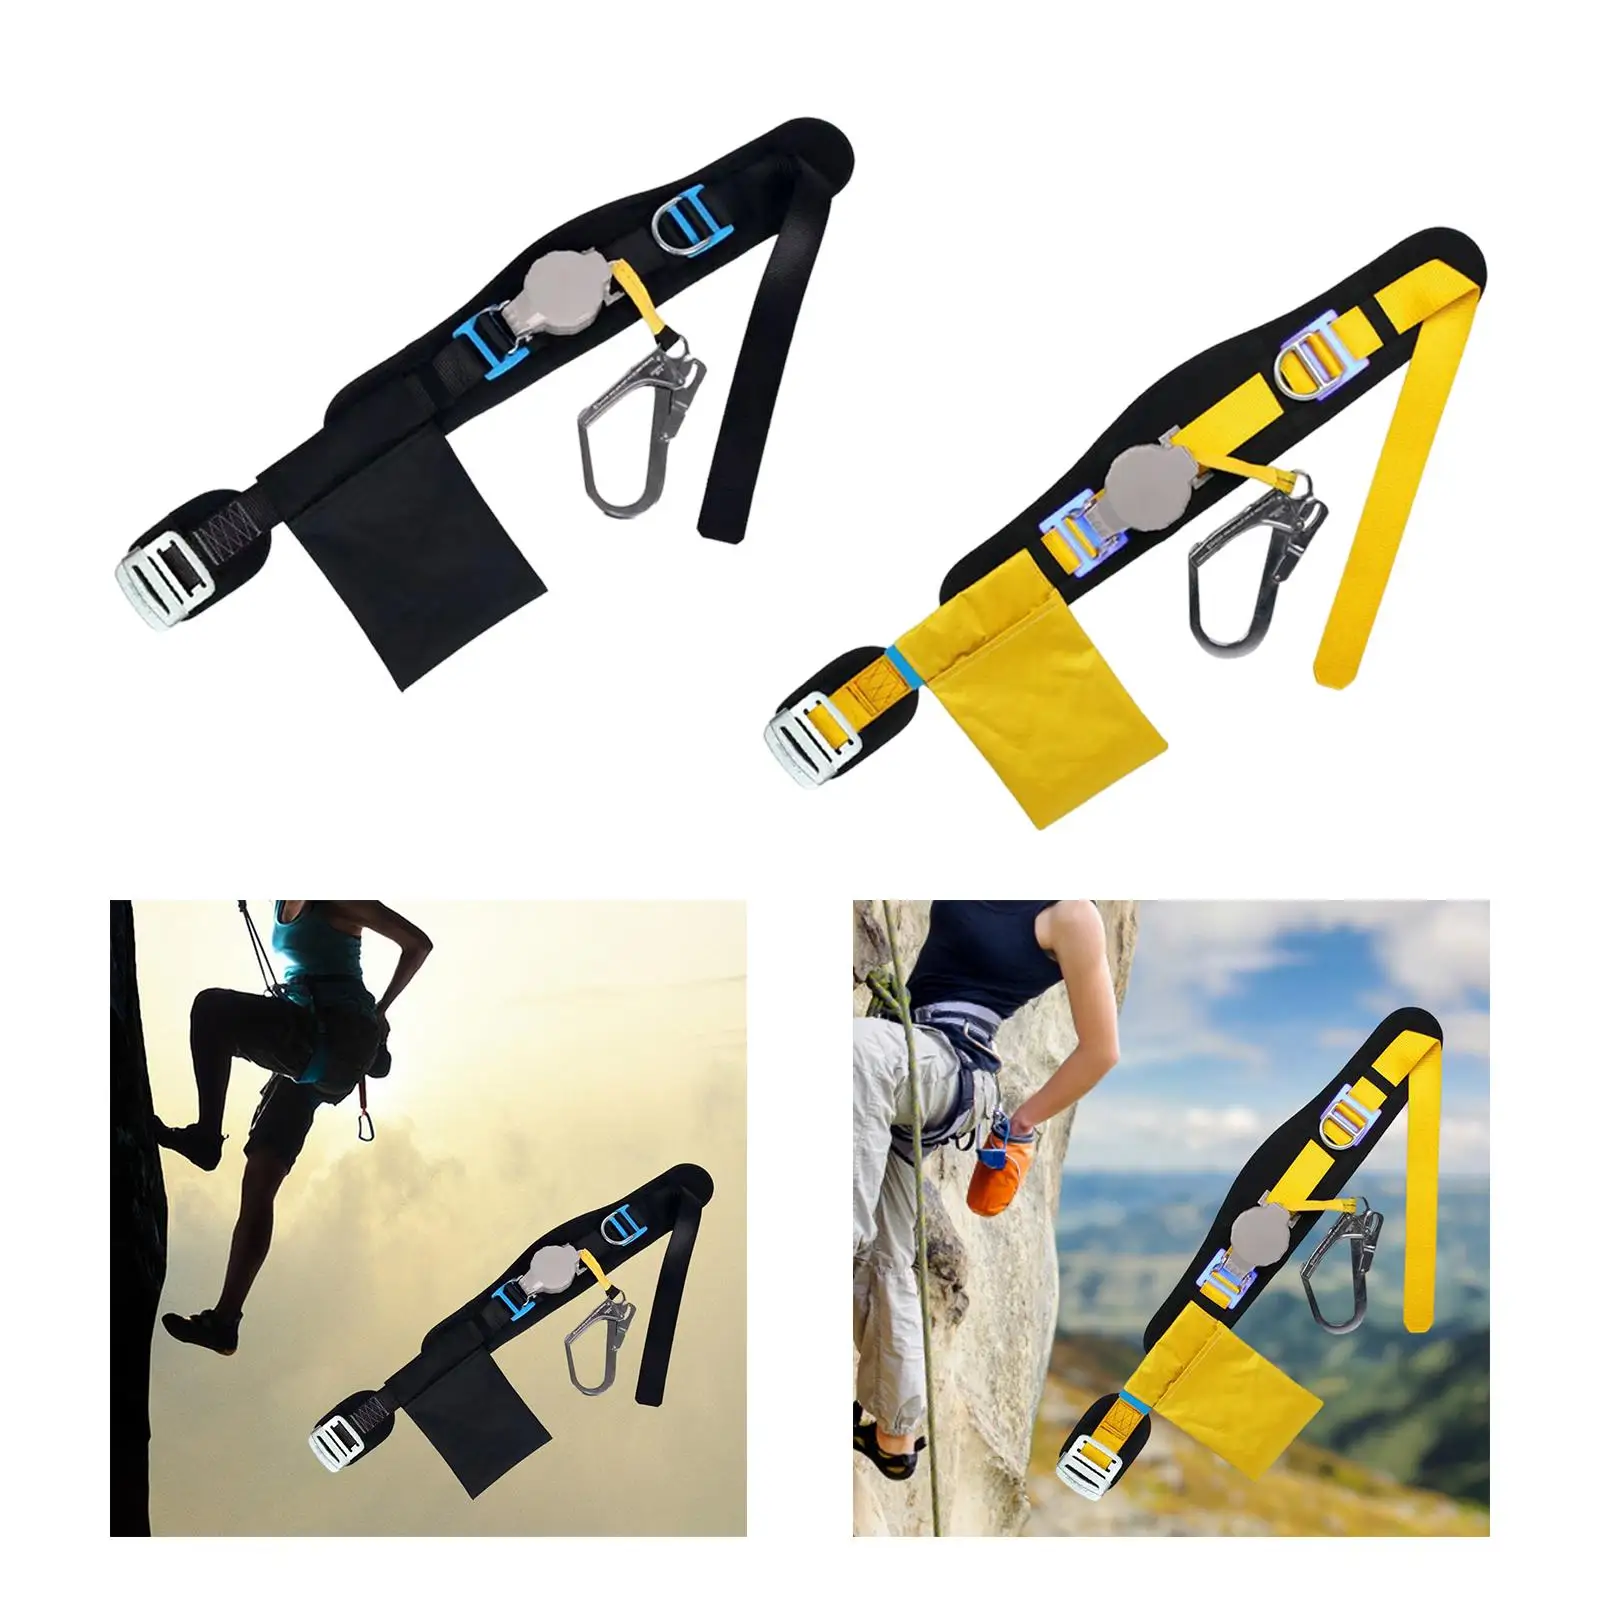 Single Seat Belt Fall Prevention Heavy Duty Equipment Supplies Protective Safety Harness Lanyard for Outdoor Activities Walking